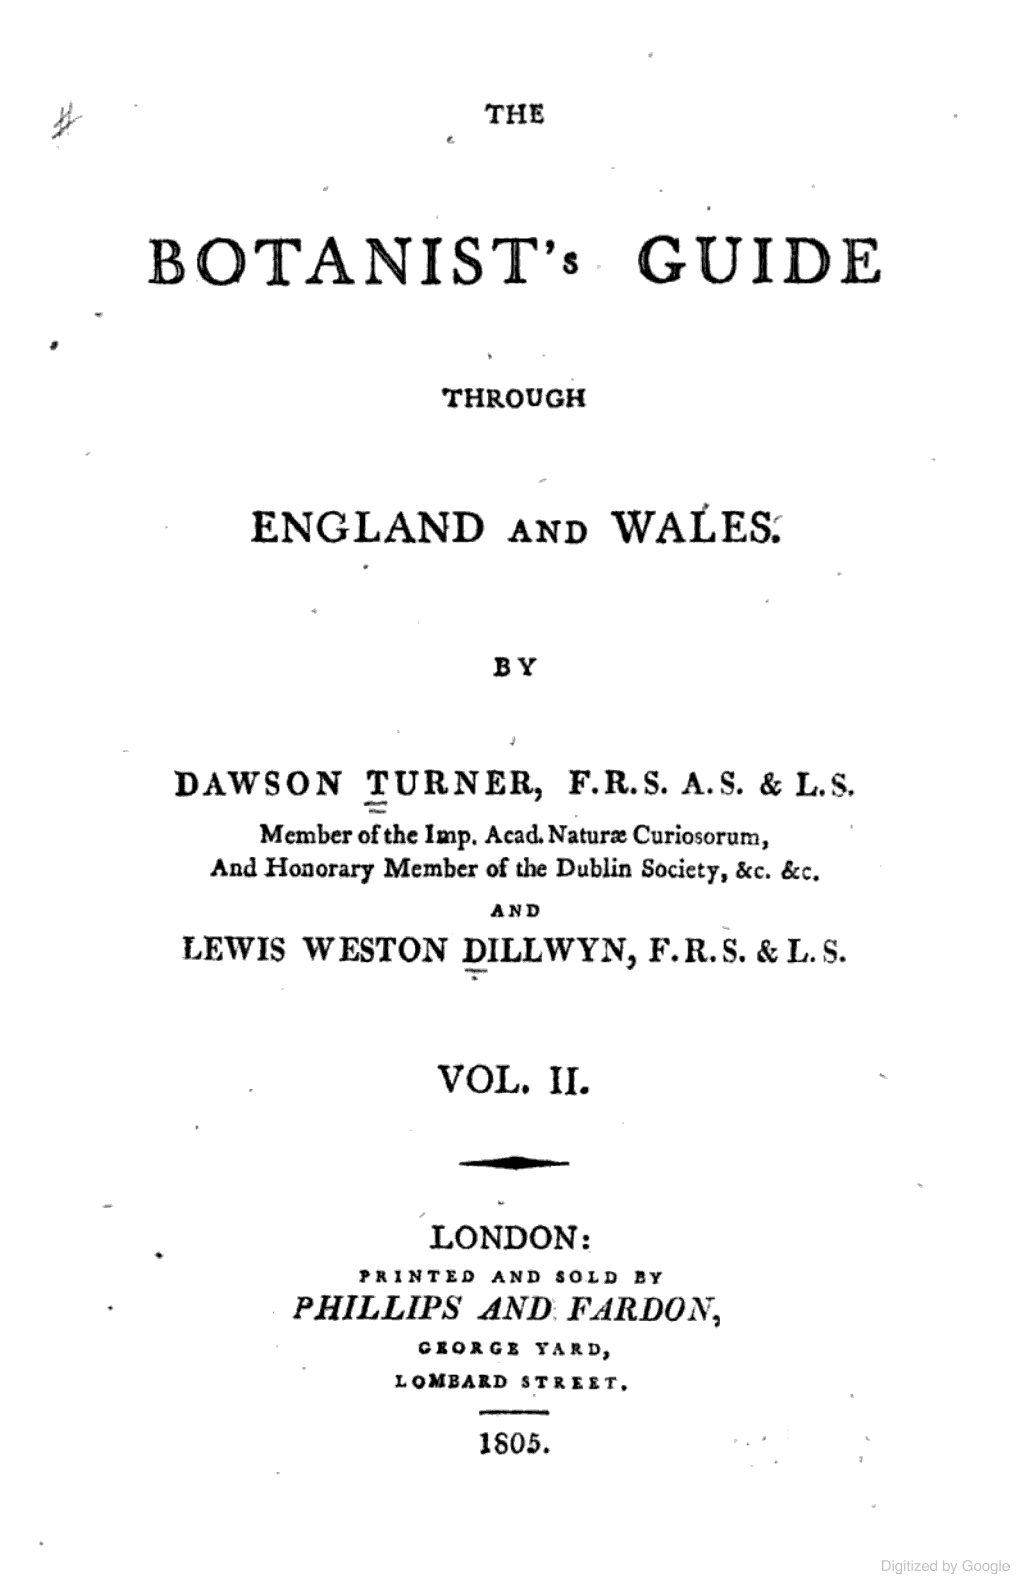 Botanist’s guide through England and Wales cover